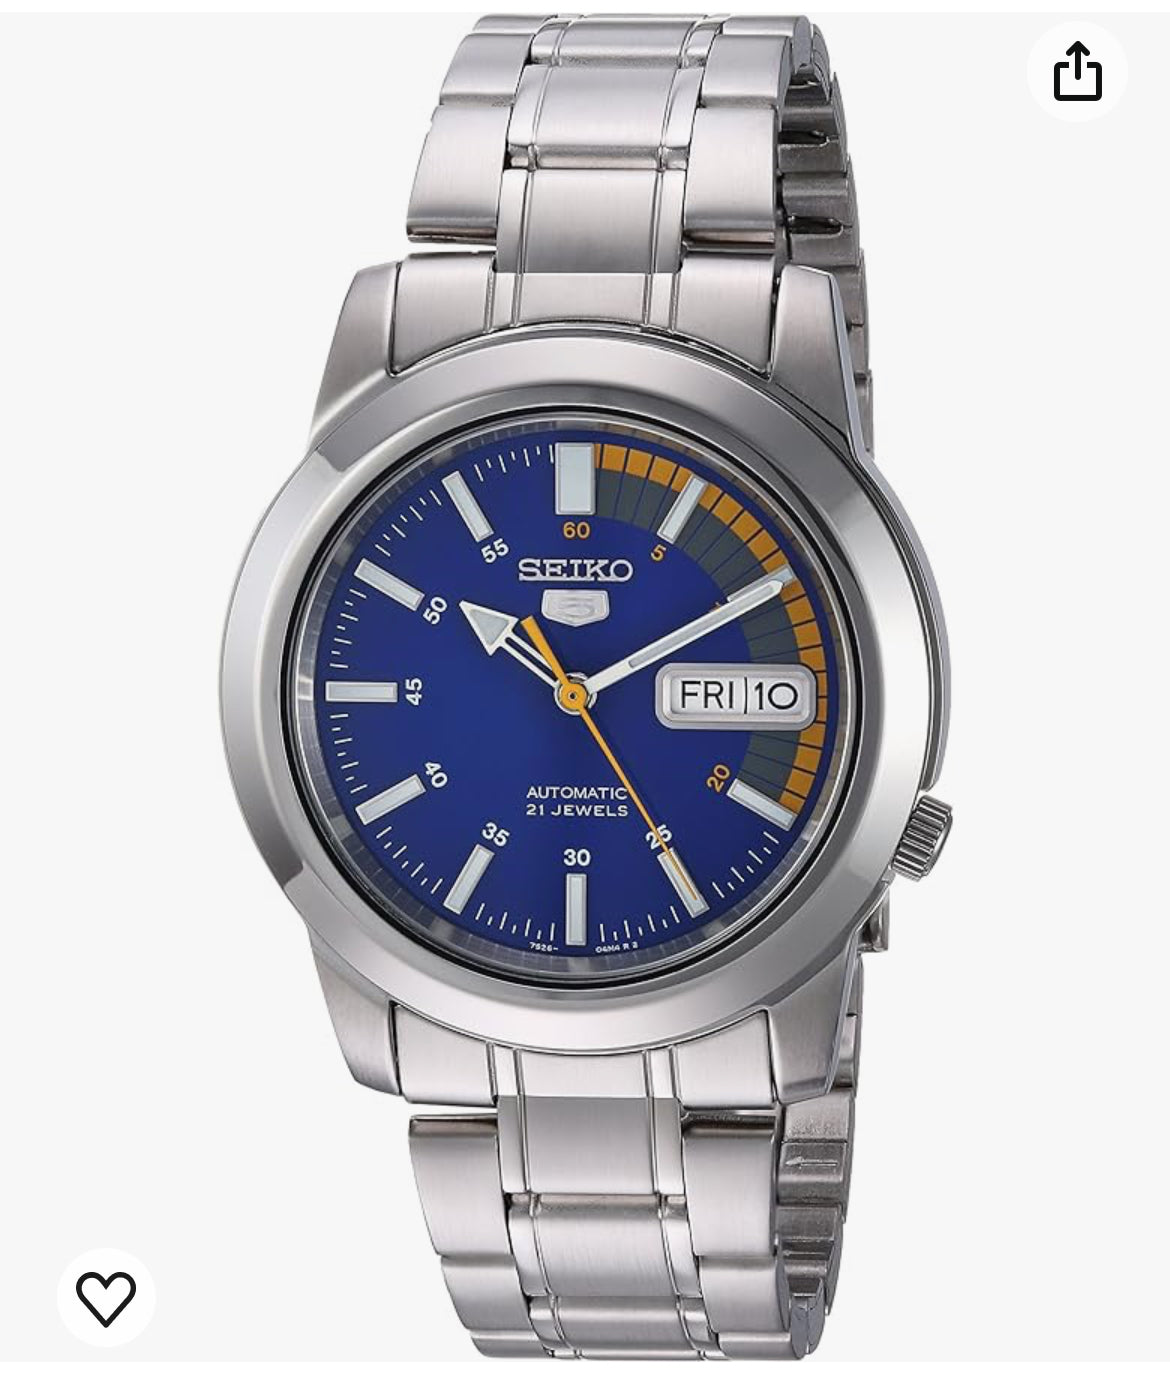 S10) SEIKO Automatic Watch for Men 5-7S Collection - with Day/Date Calendar, Luminous Hands, Stainless Steel Case & Bracelet